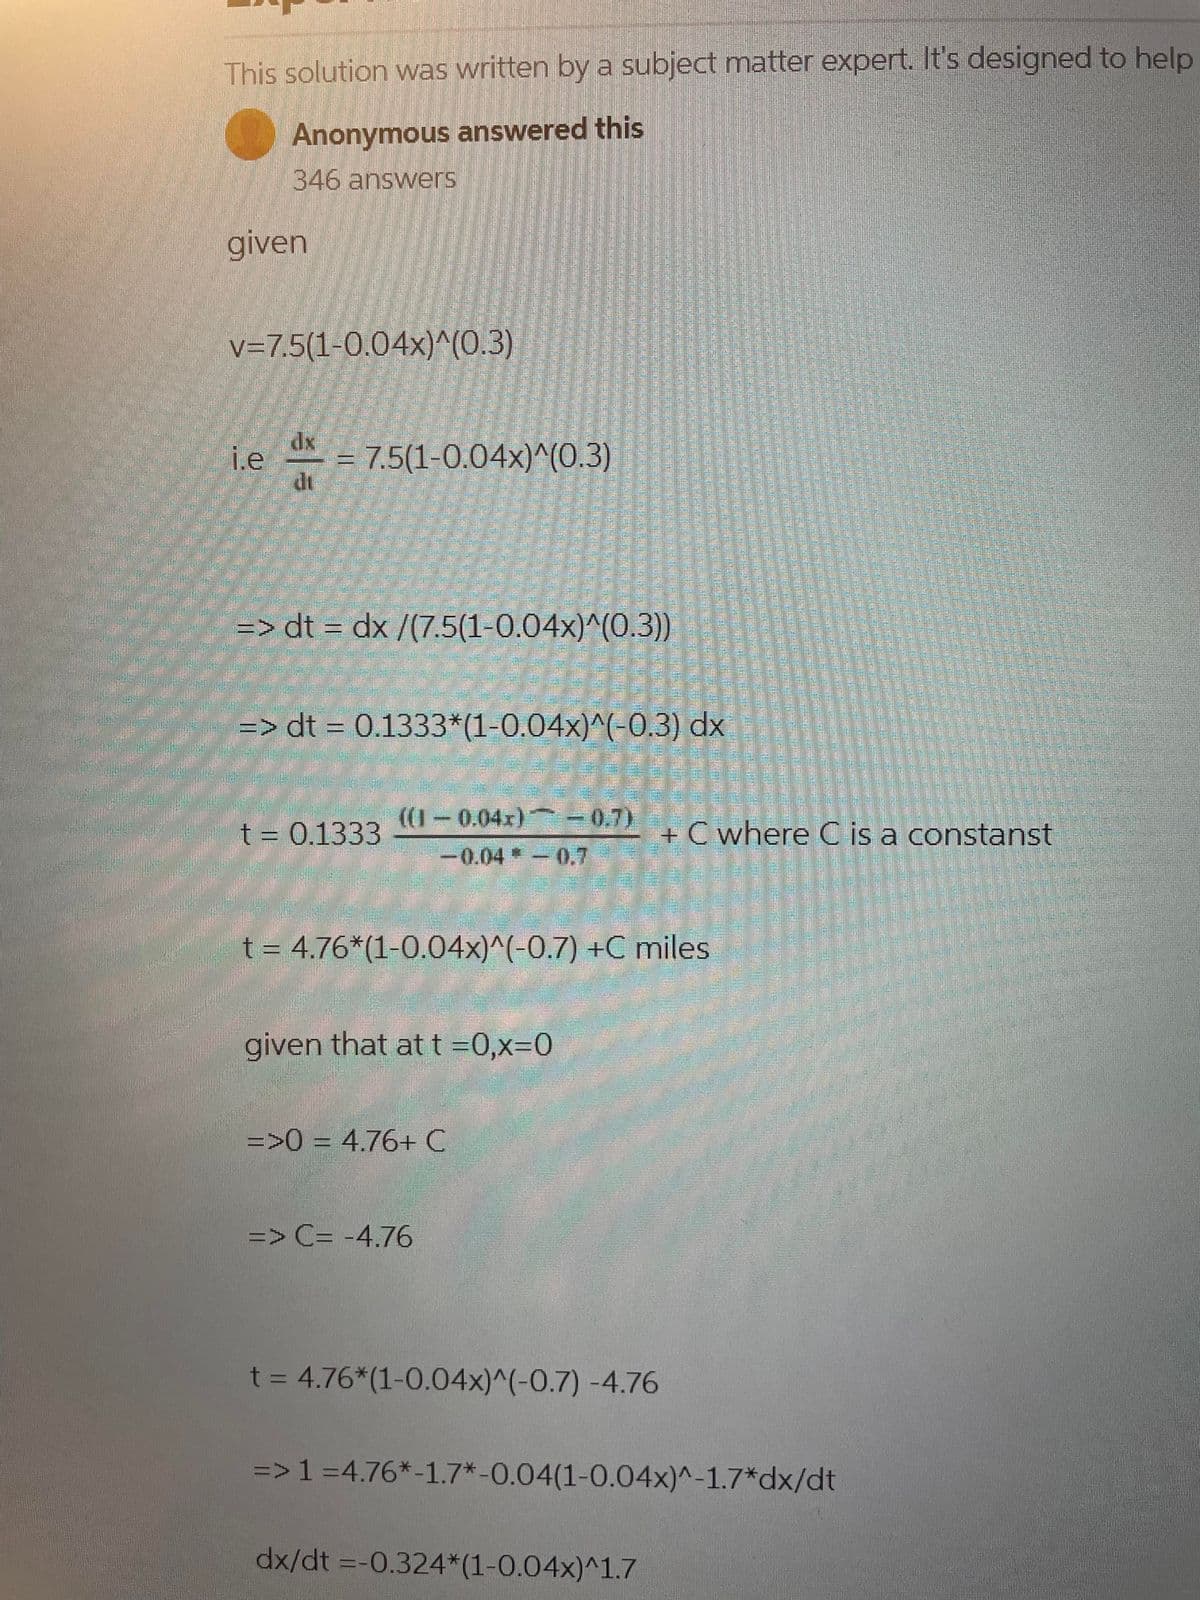 This solution was written by a subject matter expert. It's designed to help
Anonymous answered this
346 answers
given
v=7.5(1-0.04x)^(0.3)
i.e
10000
dx
=> dt = dx /(7.5(1-0.04x)^(0.3))
=> dt = 0.1333*(1-0.04x)^(-0.3) dx
M
= 7.5(1-0.04x)^(0.3)
t = 0.1333
200
BER
((1-0.04x) -0.7)
t = 4.76*(1-0.04x)^(-0.7) +C miles
-0.04*-0.7
given that at t=0,x=0
=>0 = 4.76+ C
=> C= -4.76
t = 4.76*(1-0.04x)^(-0.7) -4.76
+C where C is a constanst
=> 1 =4.76*-1.7*-0.04(1-0.04x)^-1.7*dx/dt
dx/dt = -0.324*(1-0.04x)^1.7